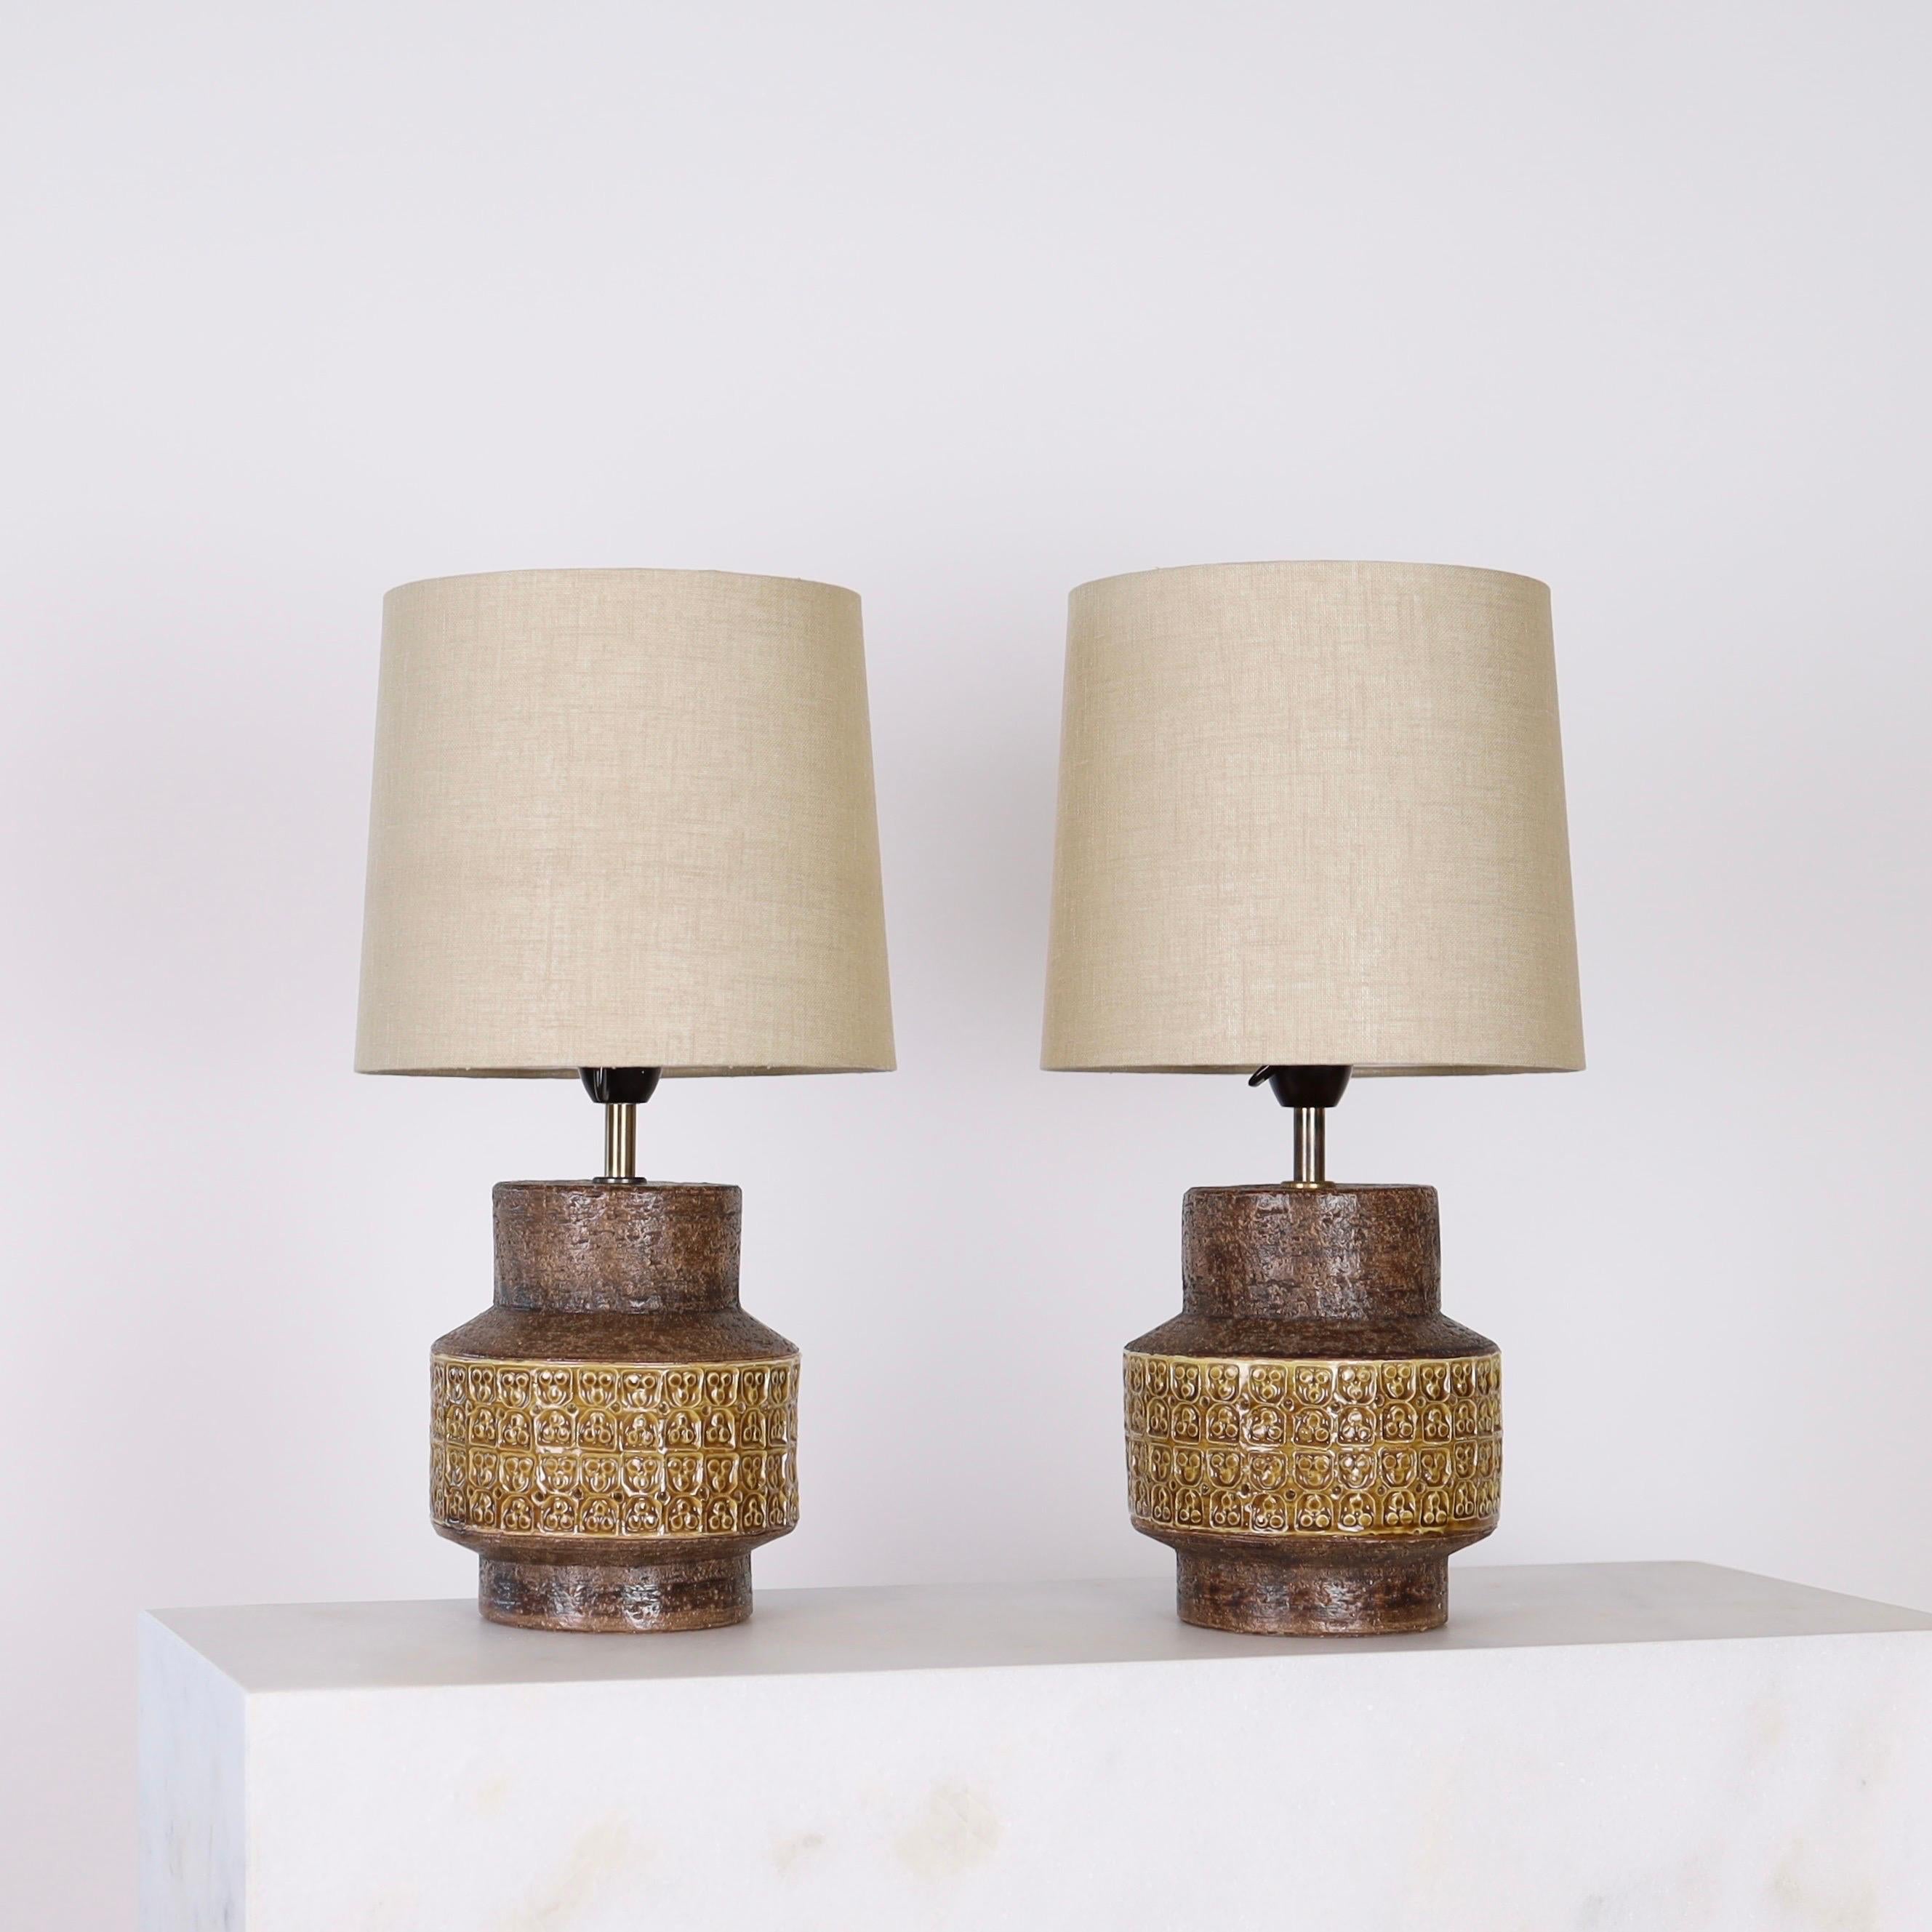 Set of curry-colored glazed stoneware desk lamps designed by Svend Aage Holm Sørensen and made in Italy in the 1950s. 

* A set (2) stoneware desk lamps with curry-colored glaze and beige fabric shades.
* Designer: Svend Aage Holm Sørensen
*